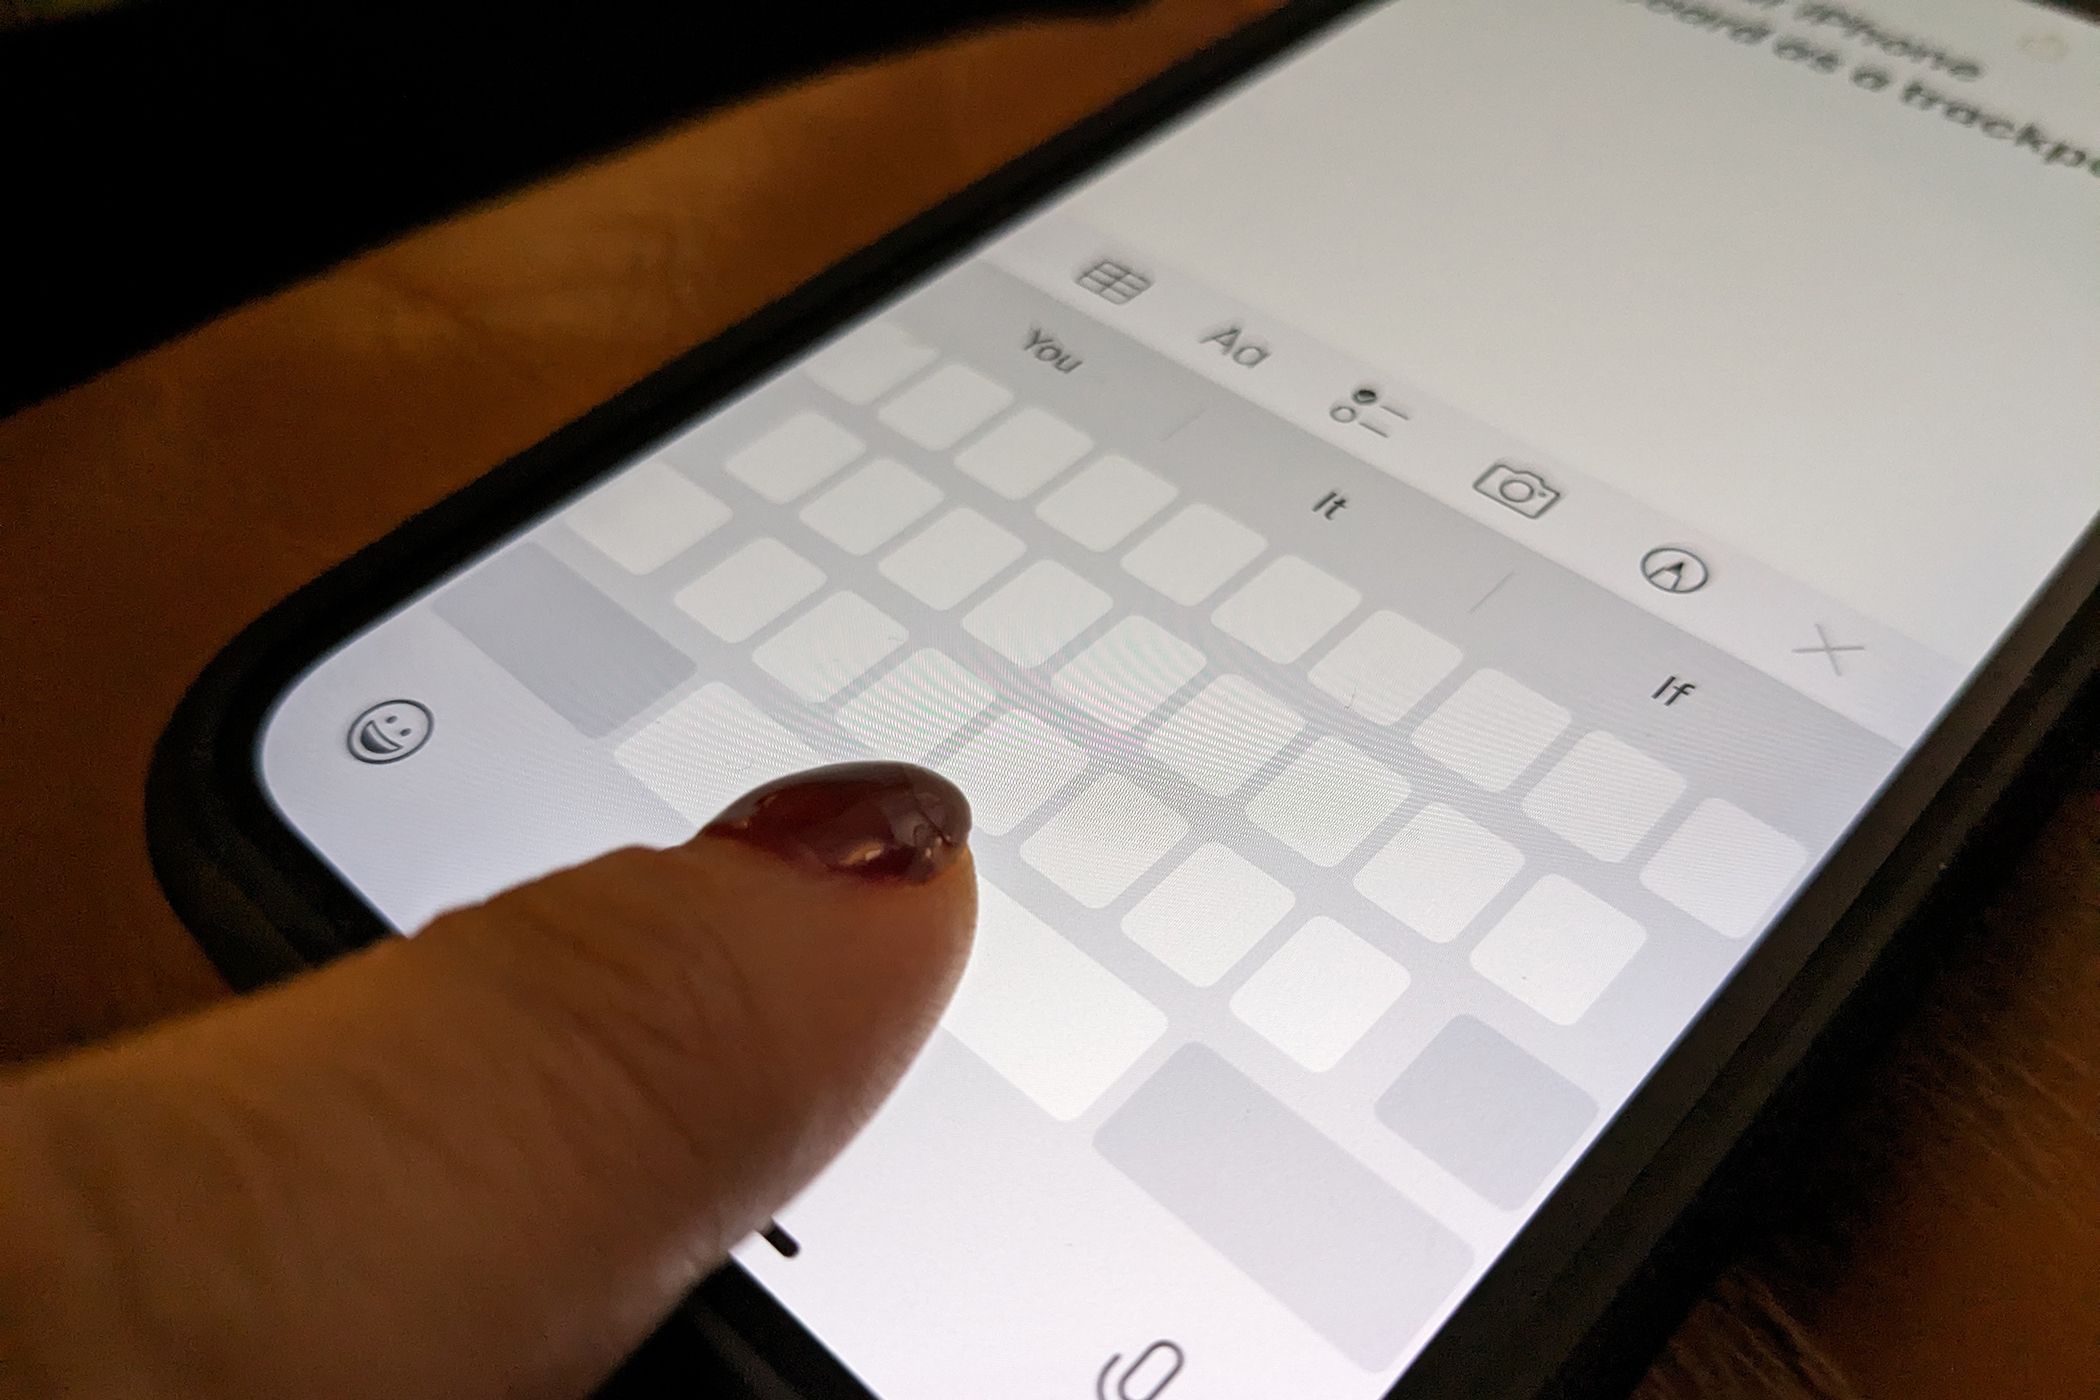 A finger on the spacebar of the iPhone, turning the keyboard into a trackpad.